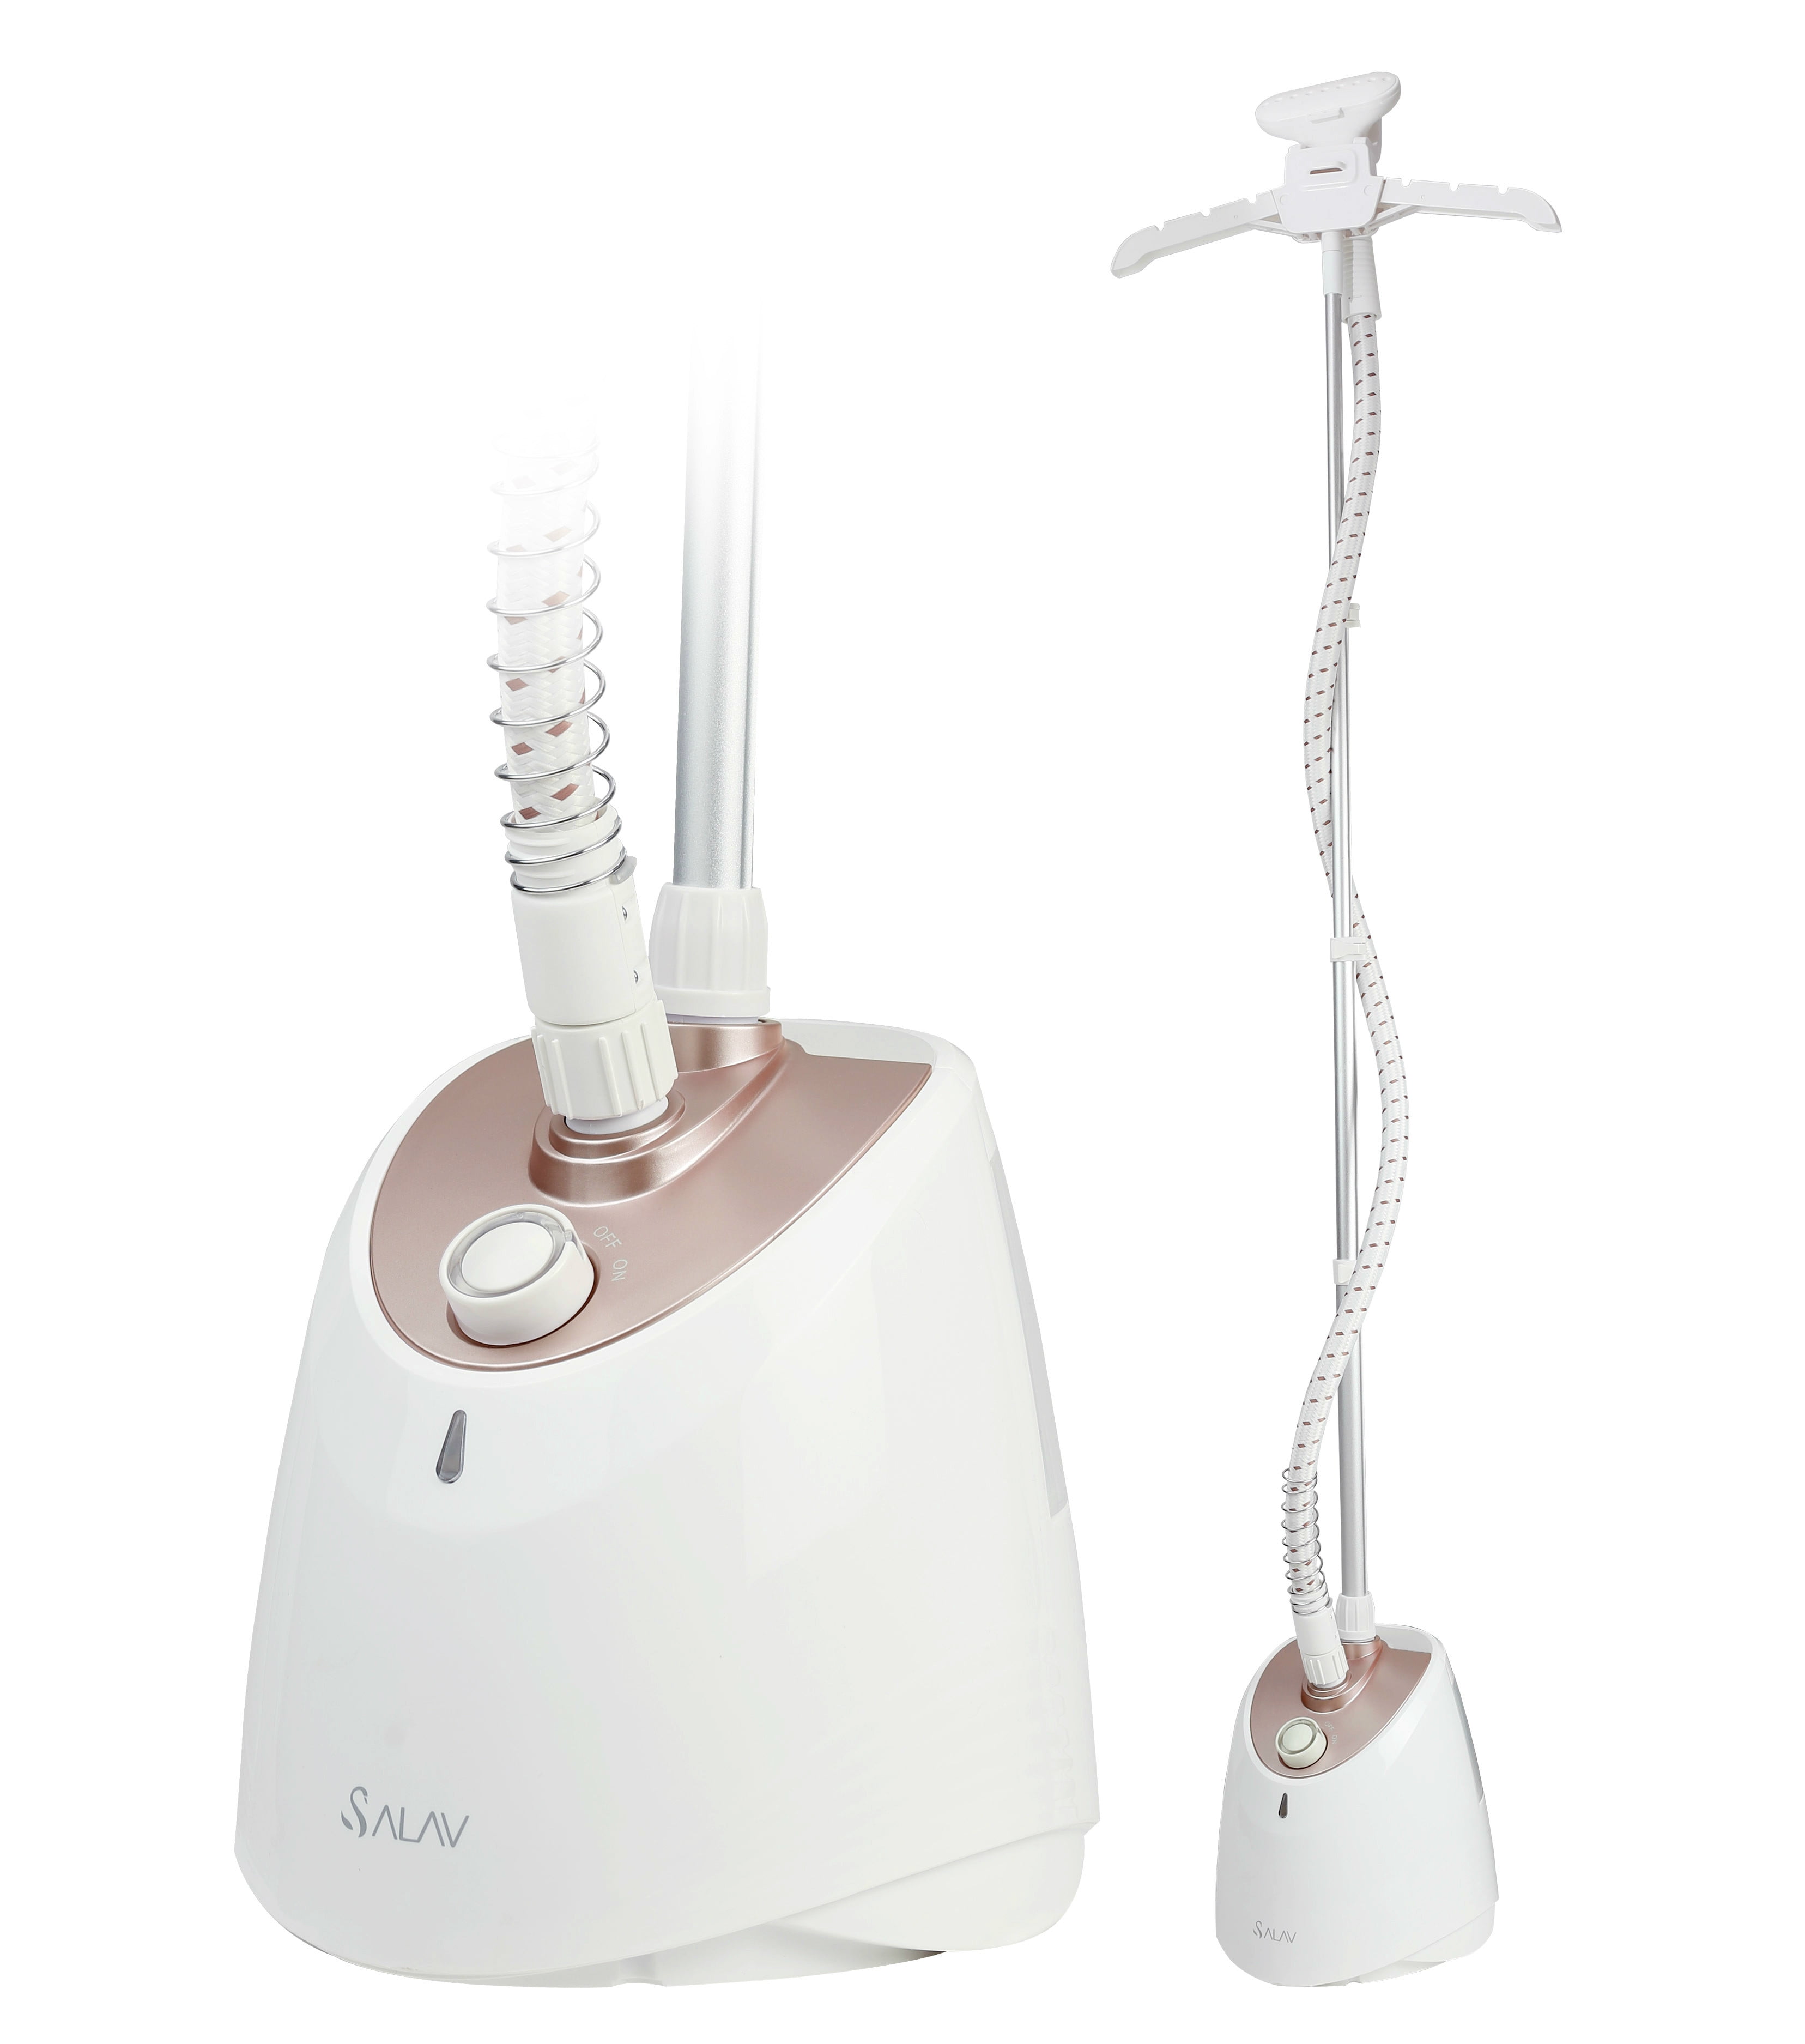 SALAV Gs34-bj 1500w Performance Garment Steamer With 360 Swivel Multi-hook and 4 for sale online 